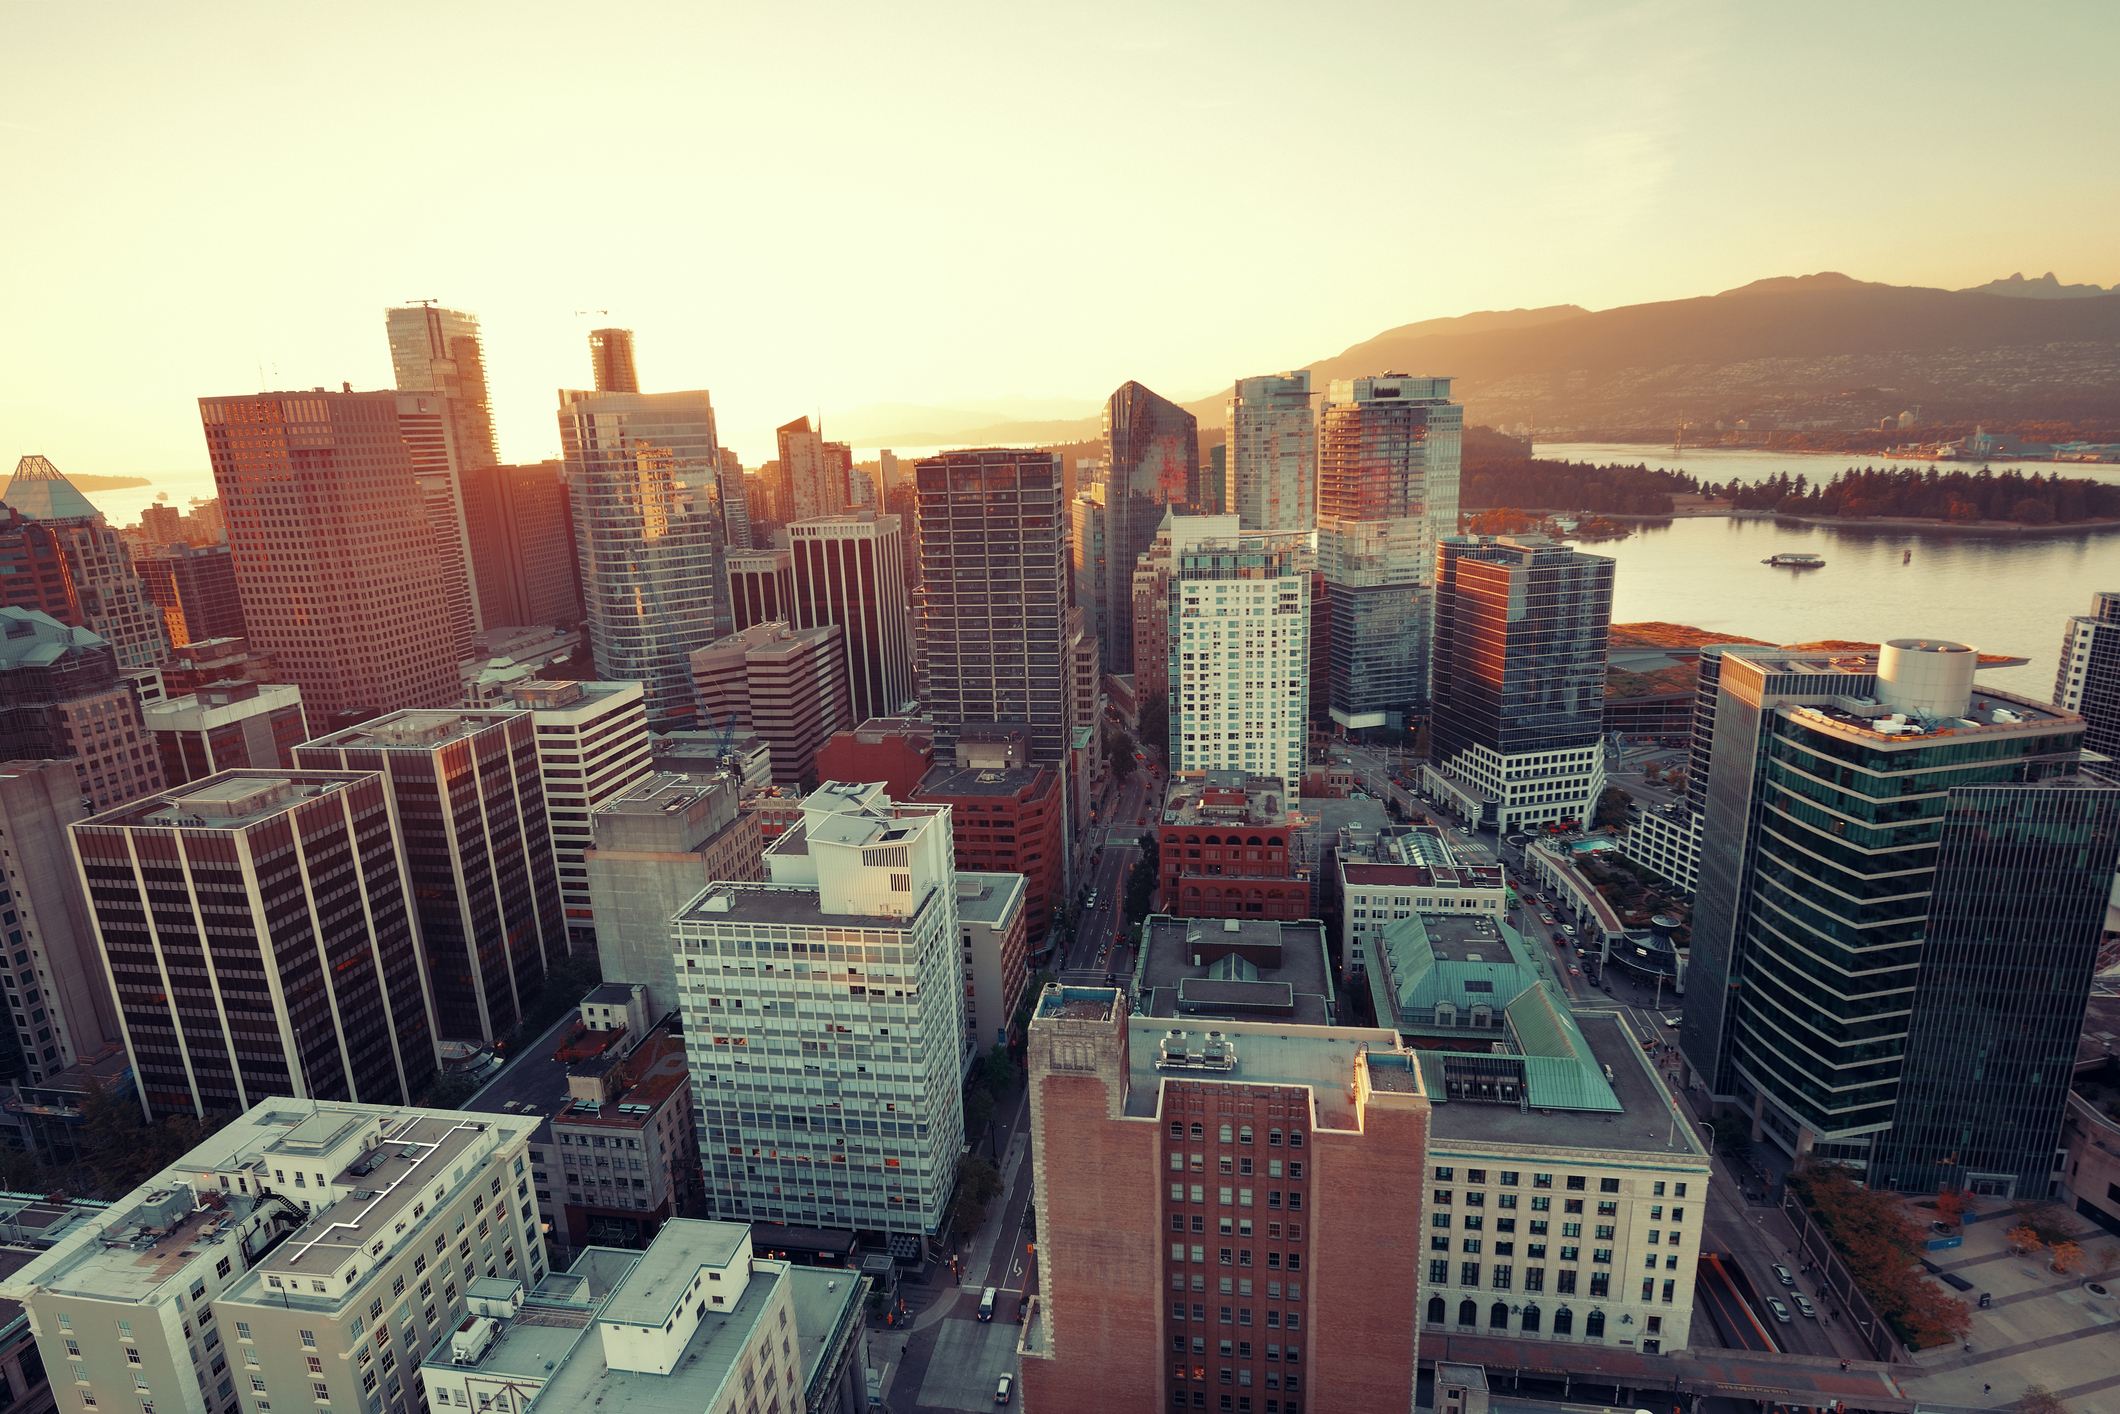 Vancouver rooftop view with urban architectures at sunset.